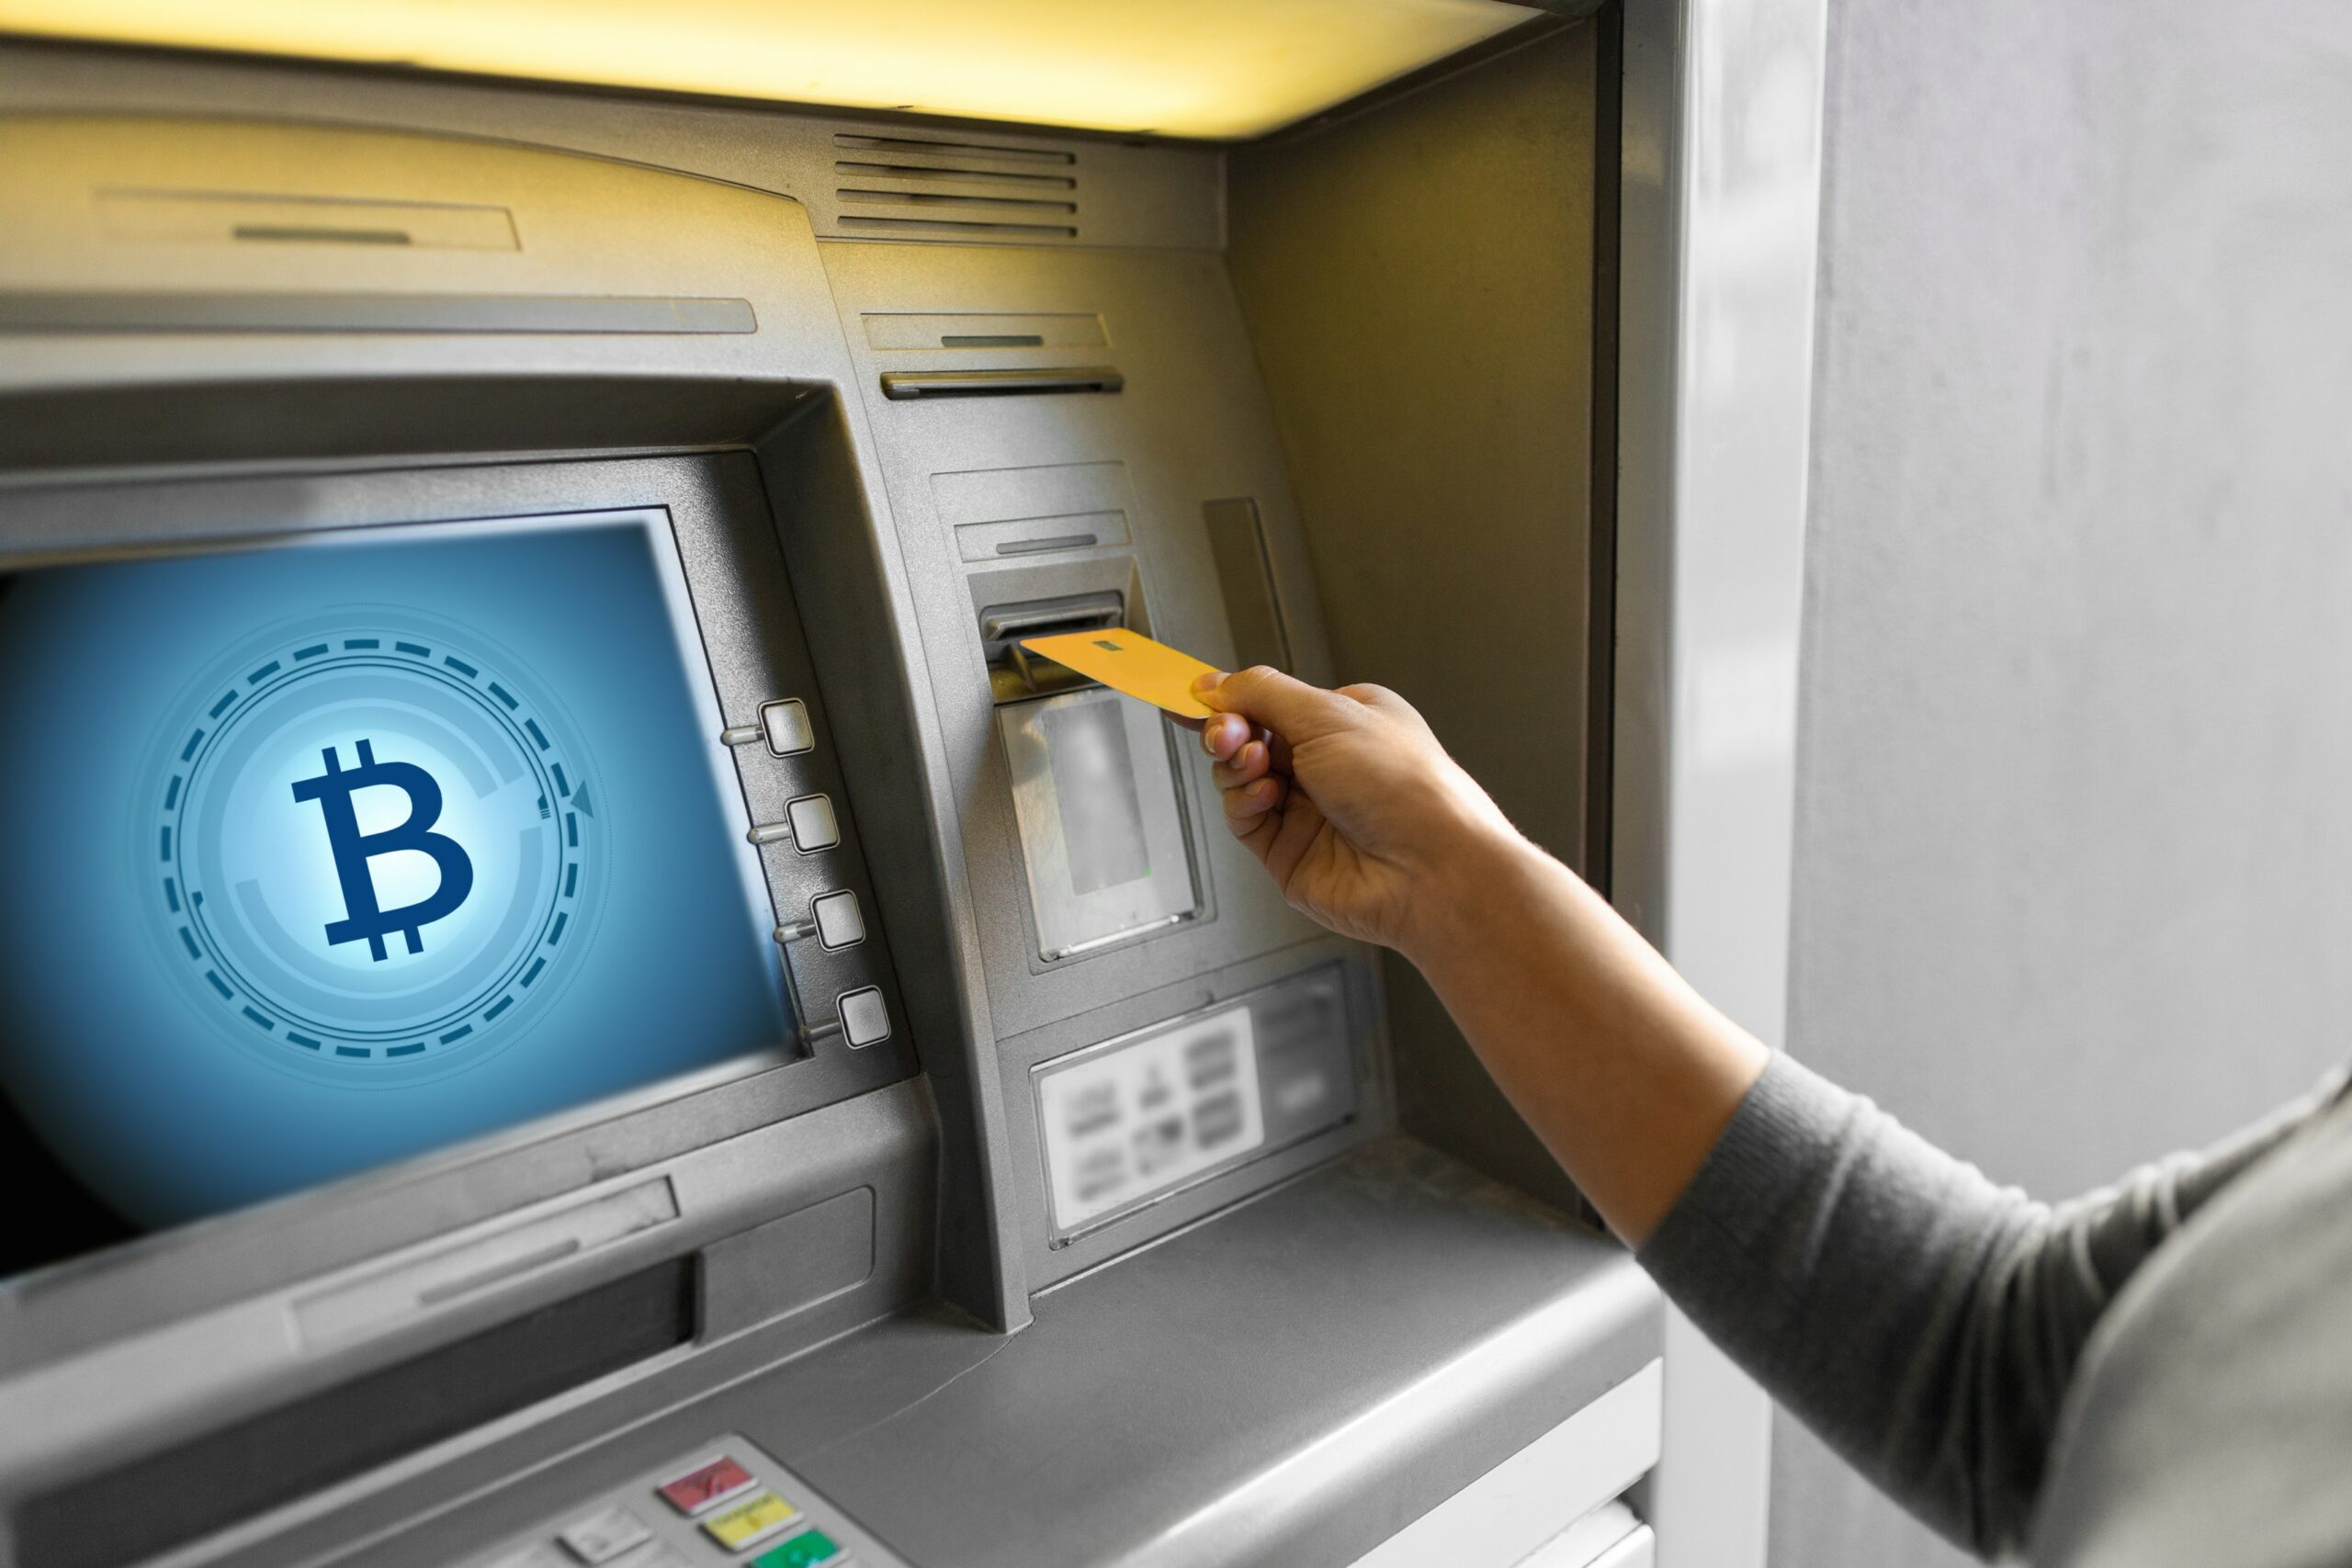 Bitcoin ATMs On The Rise: Crypto Goes Mainstream With Over 38,000 Machines Worldwide